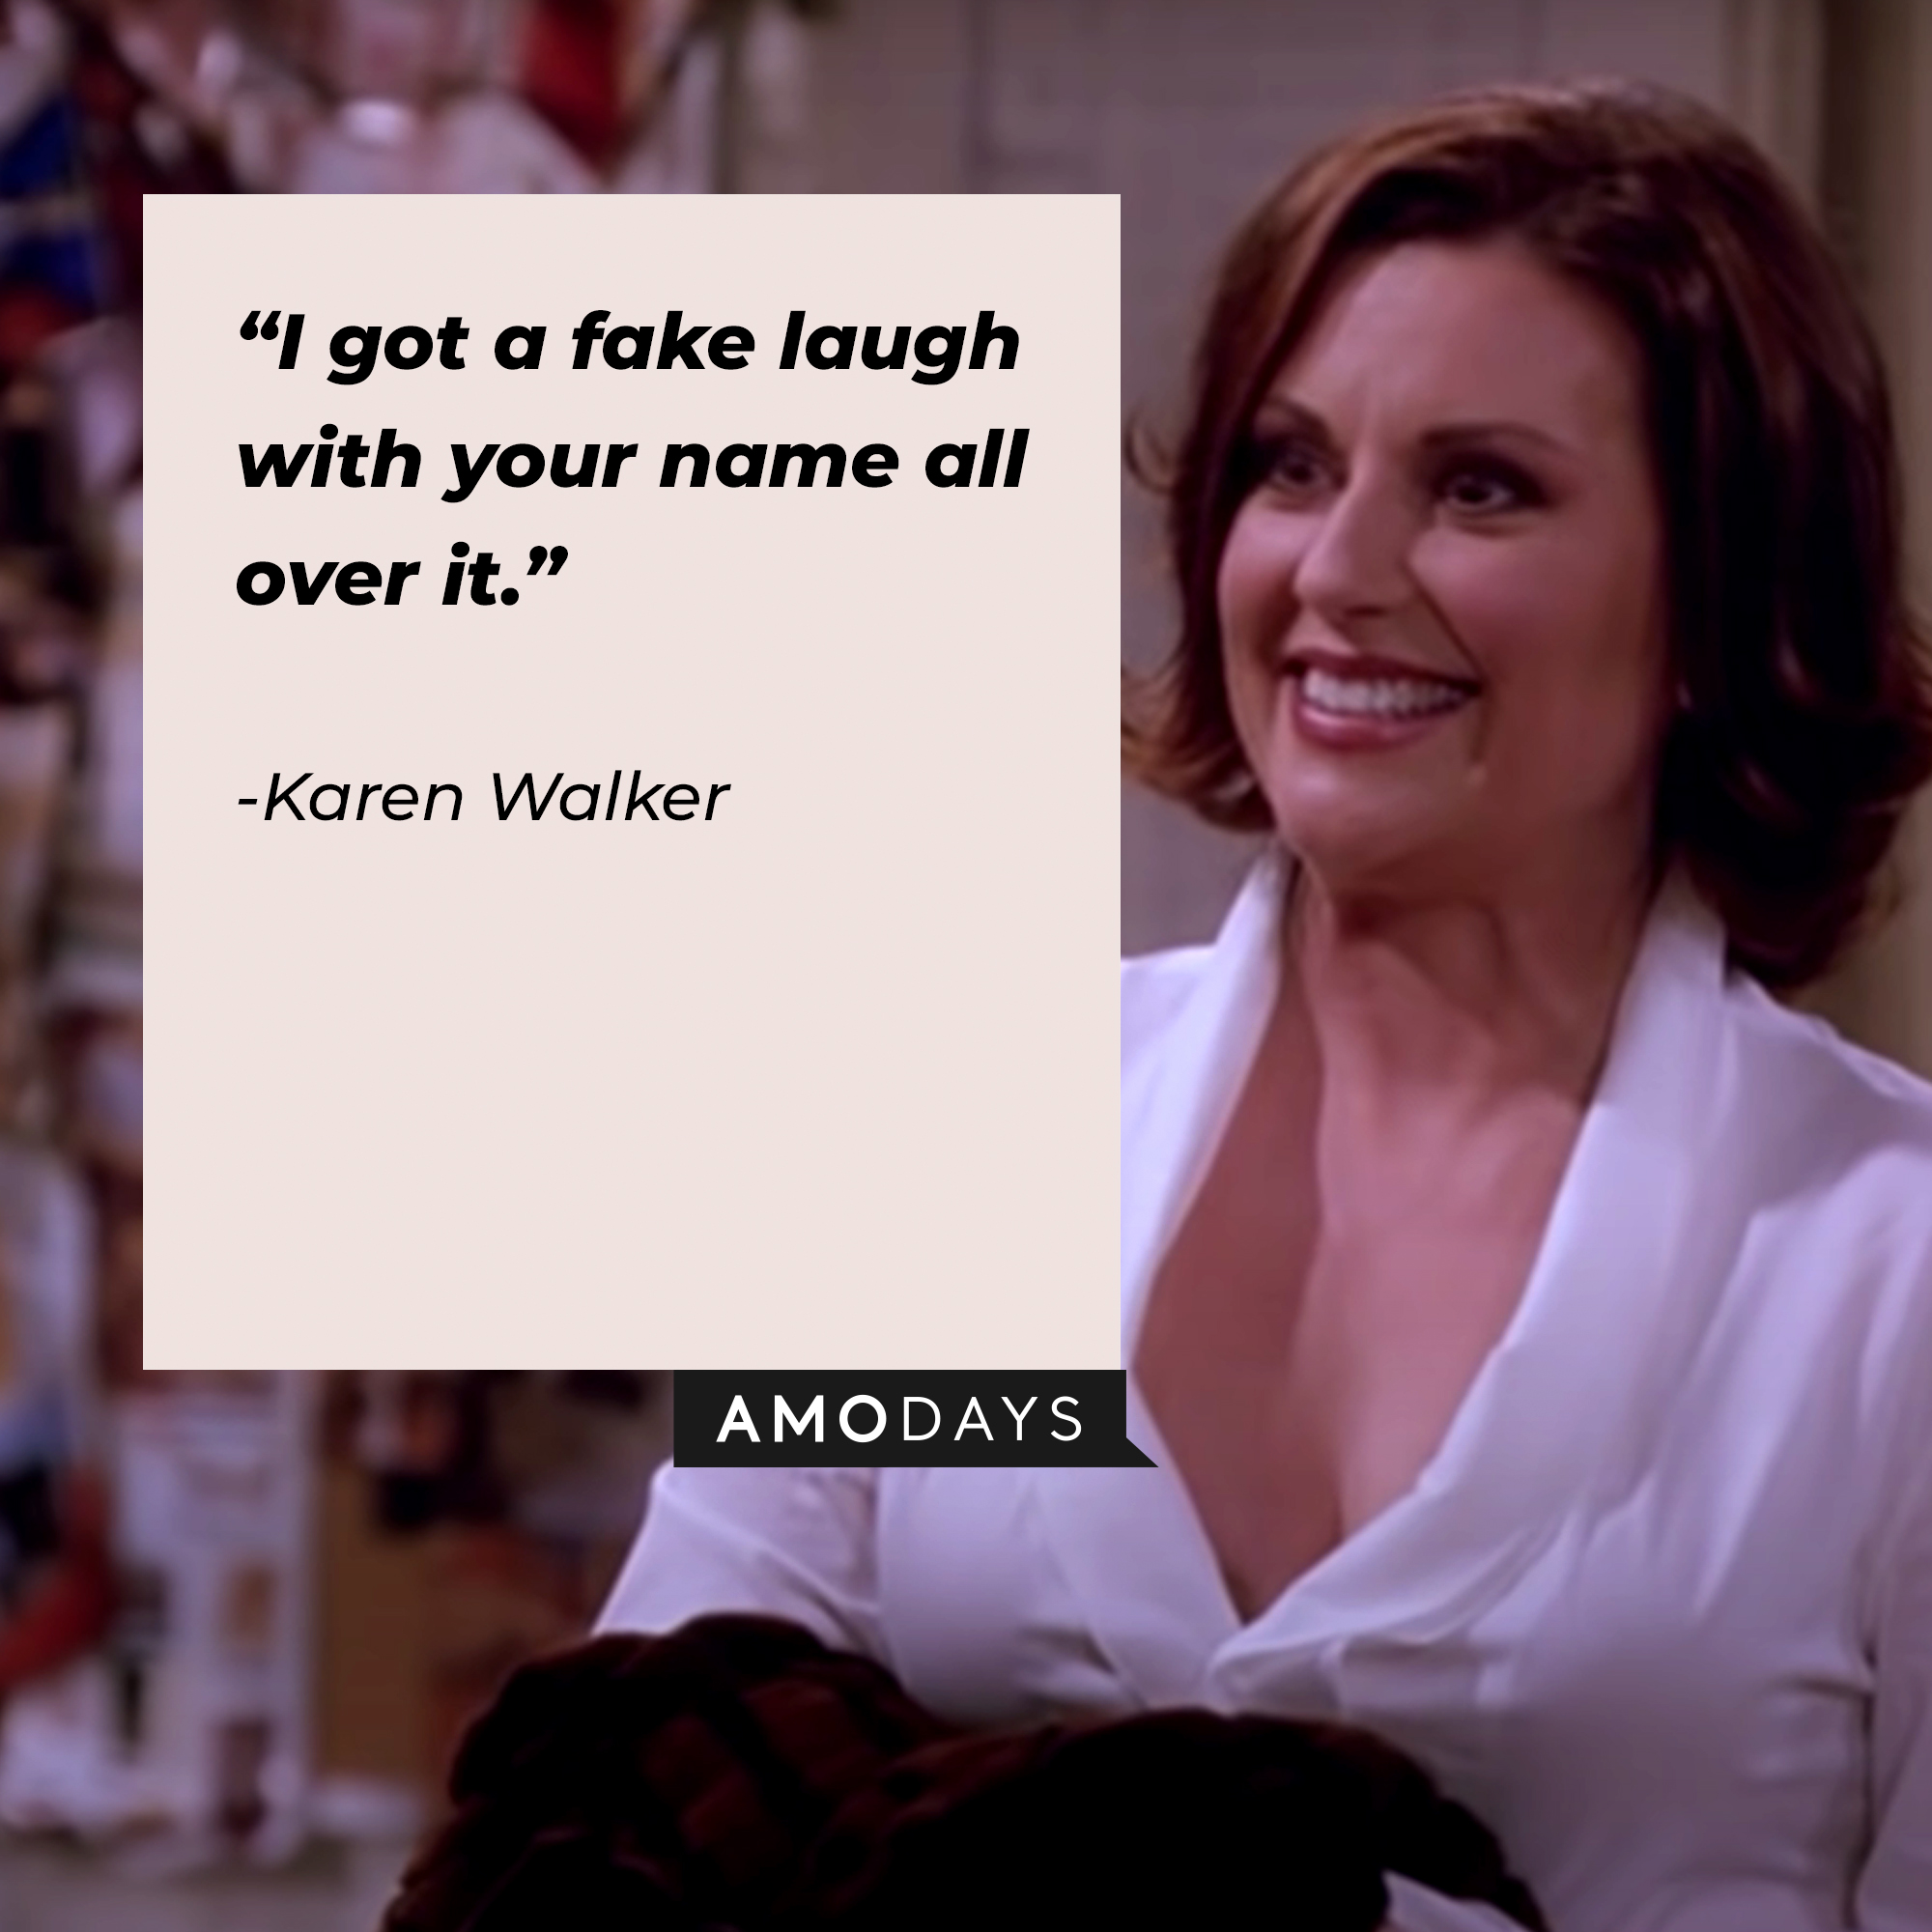 A photo of Karen Walker with the quote, "I got a fake laugh with your name all over it." | Source: YouTube/ComedyBites